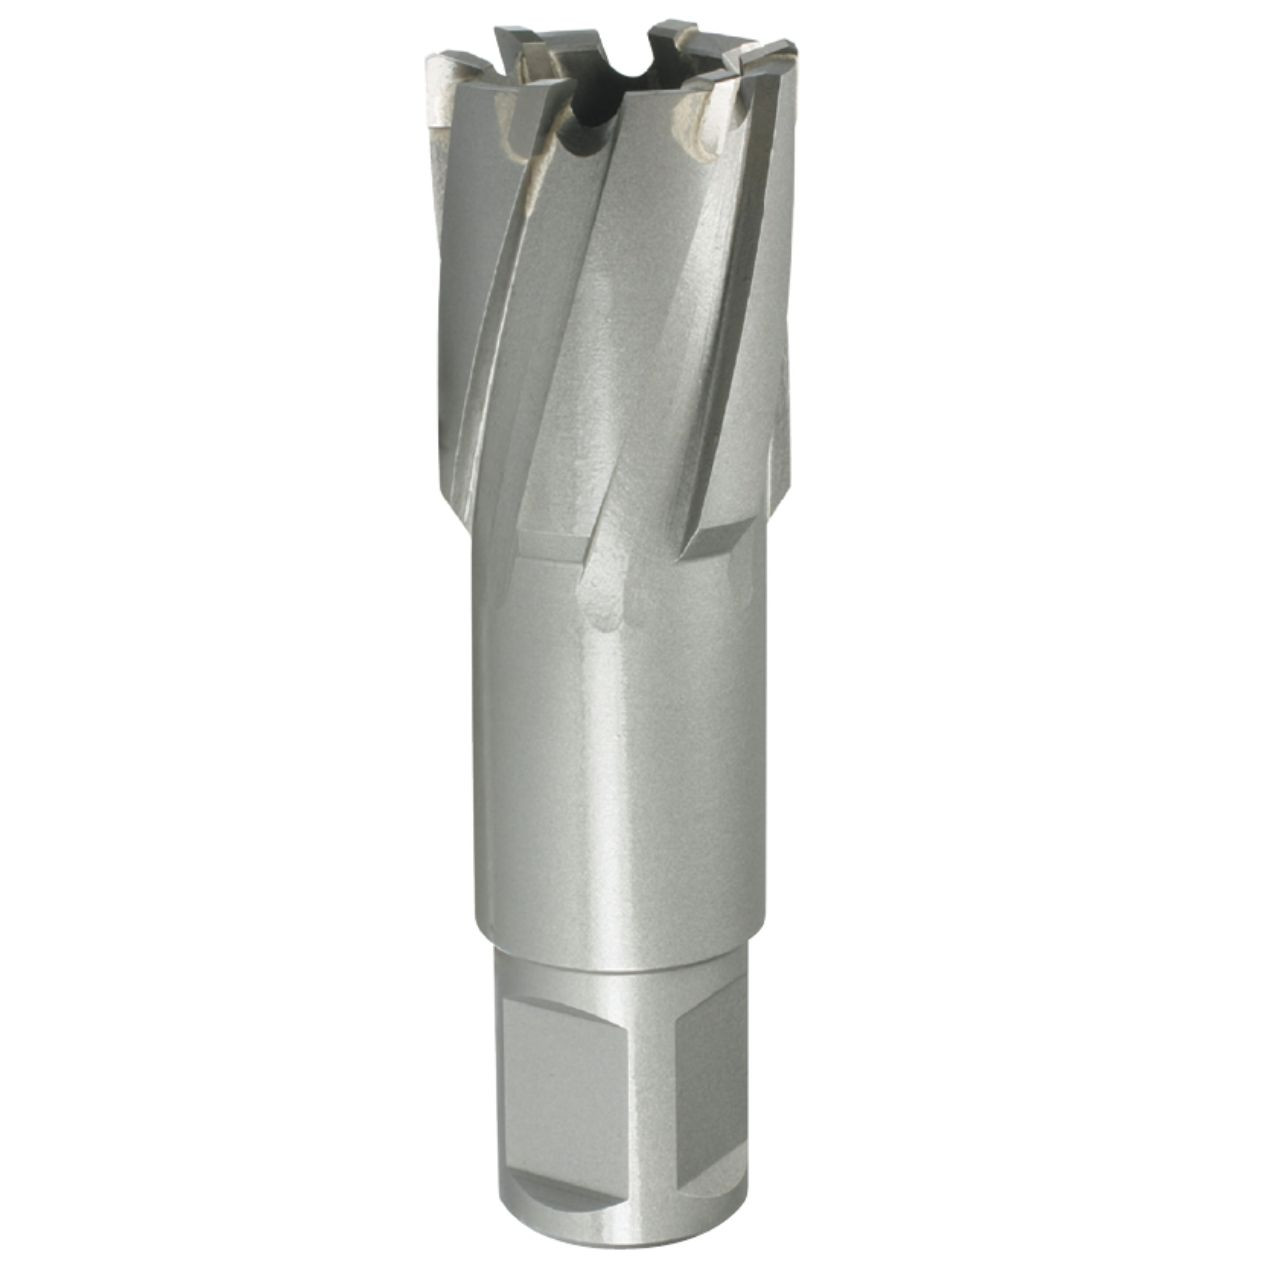 32 X 50 TCT Excision Core Drill